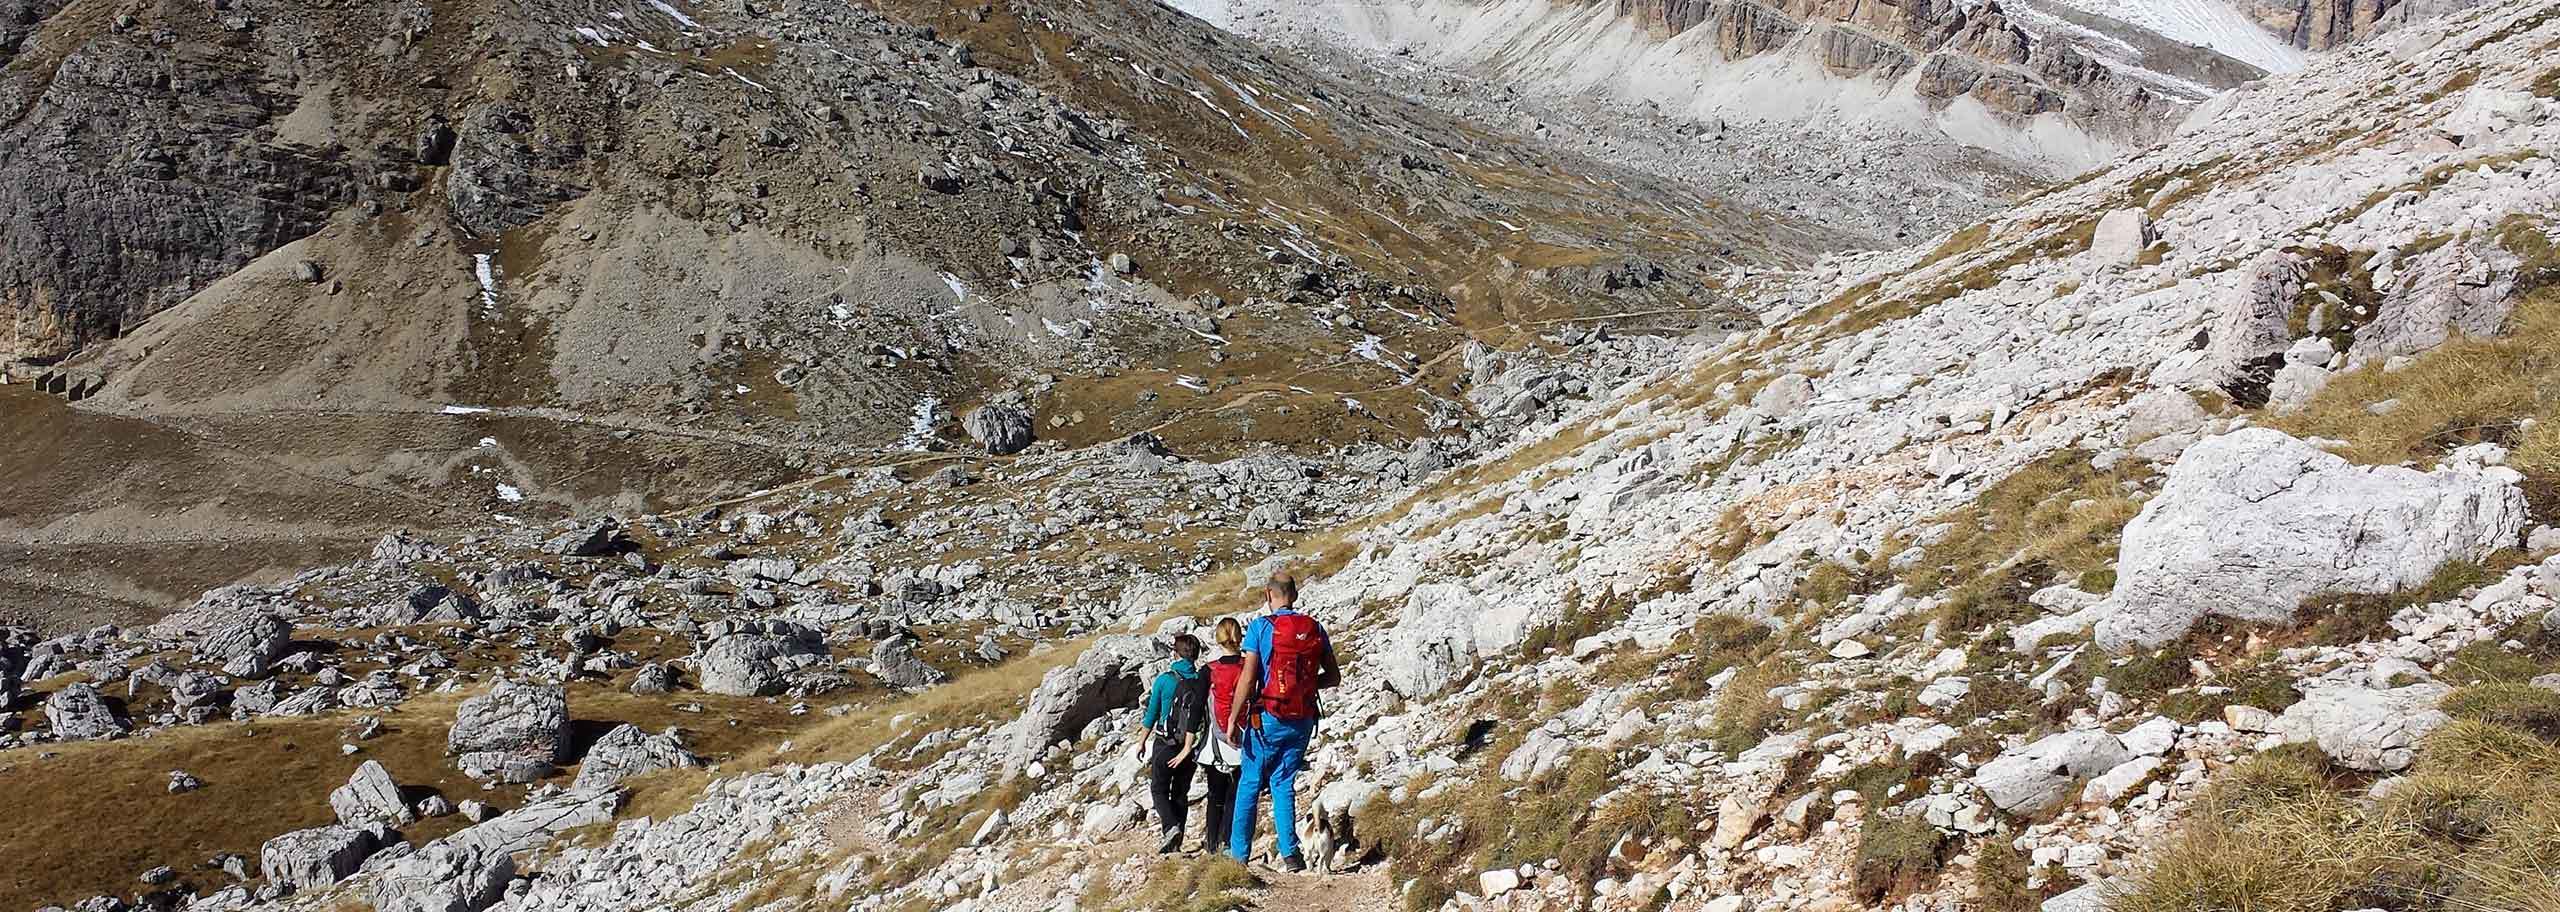 Trekking with a Mountain Guide at Falcade